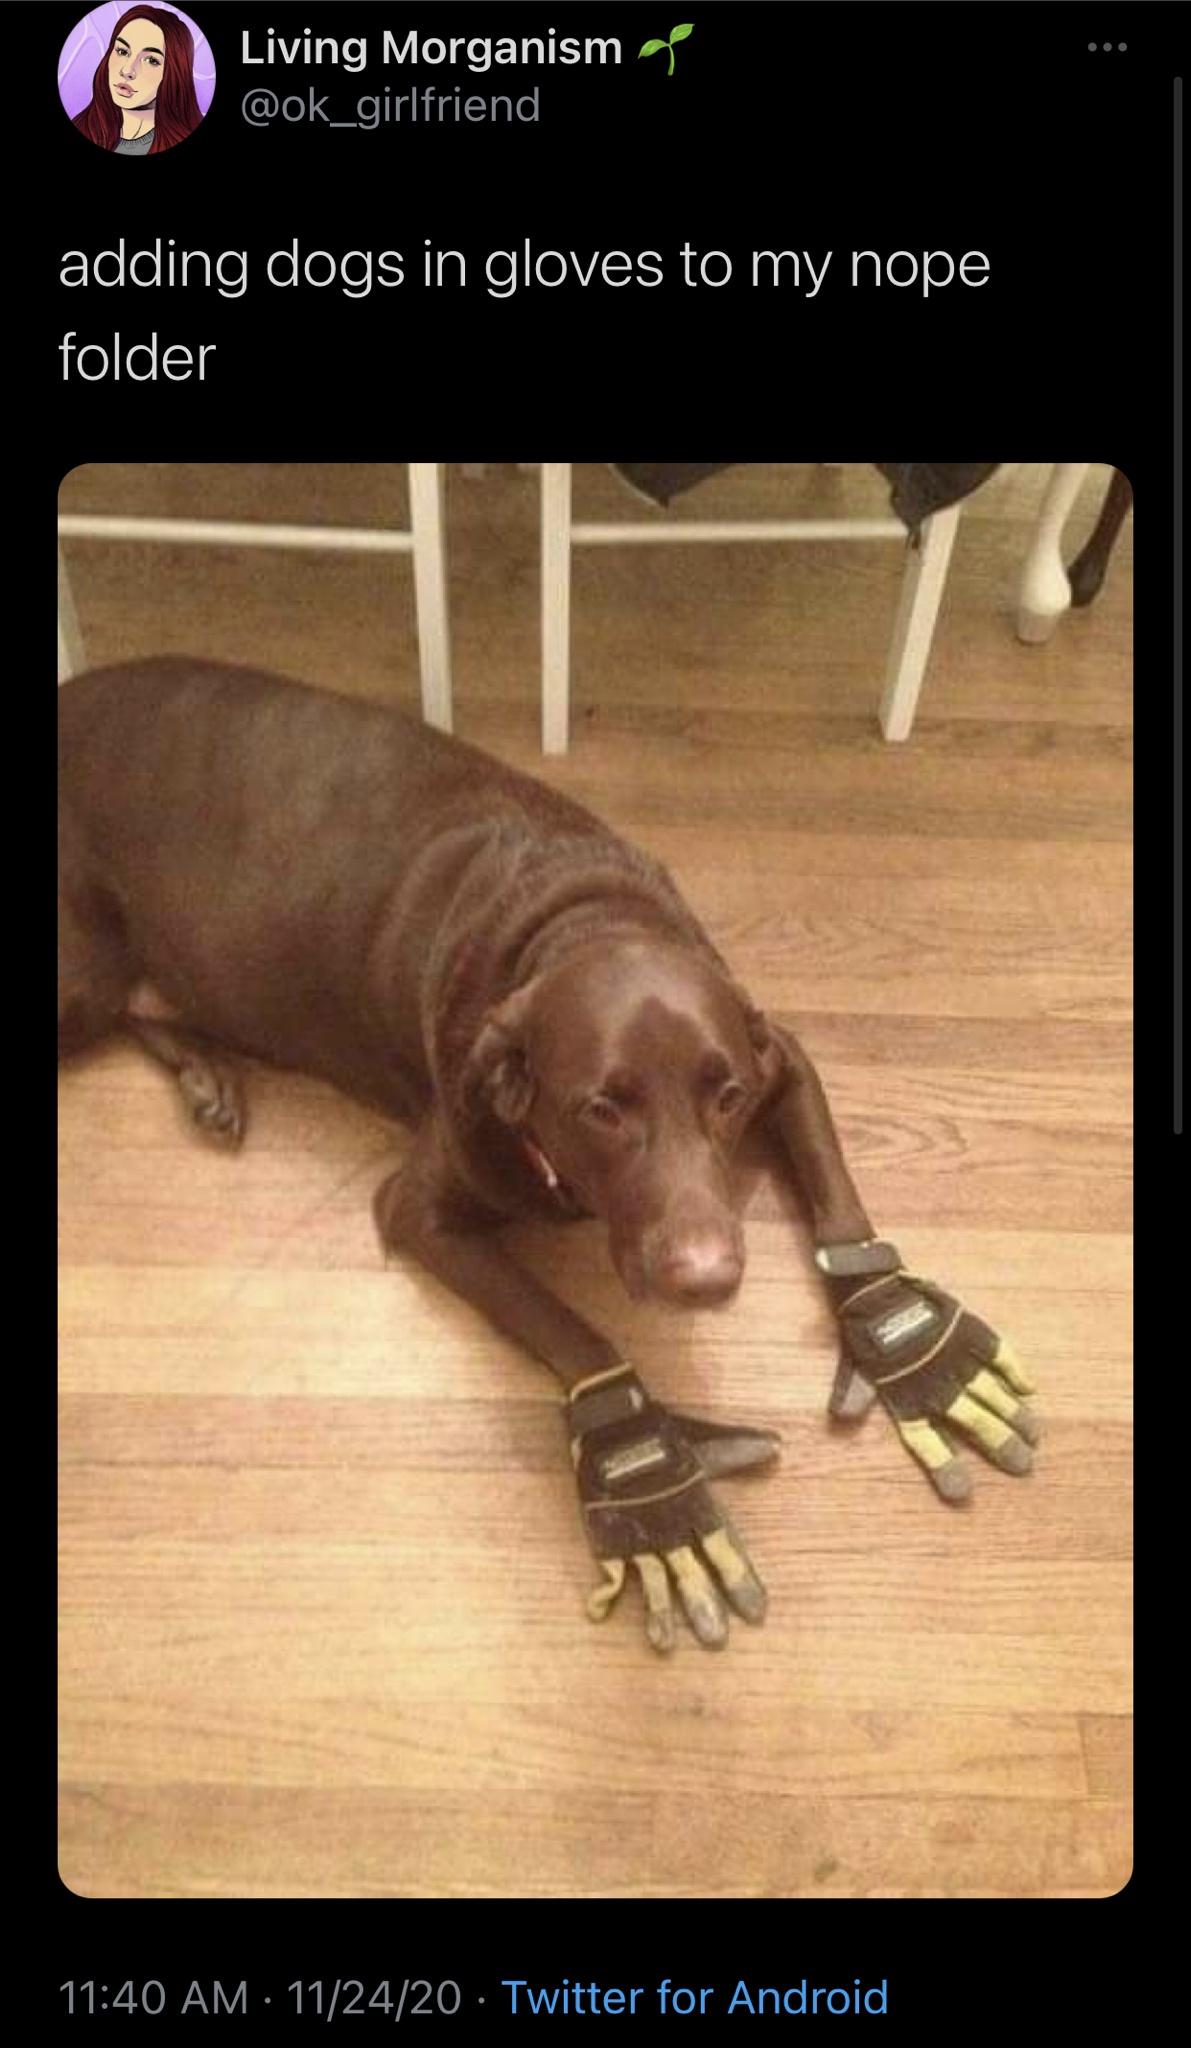 animal wearing gloves - Living Morganism adding dogs in gloves to my nope folder Pu 112420 Twitter for Android